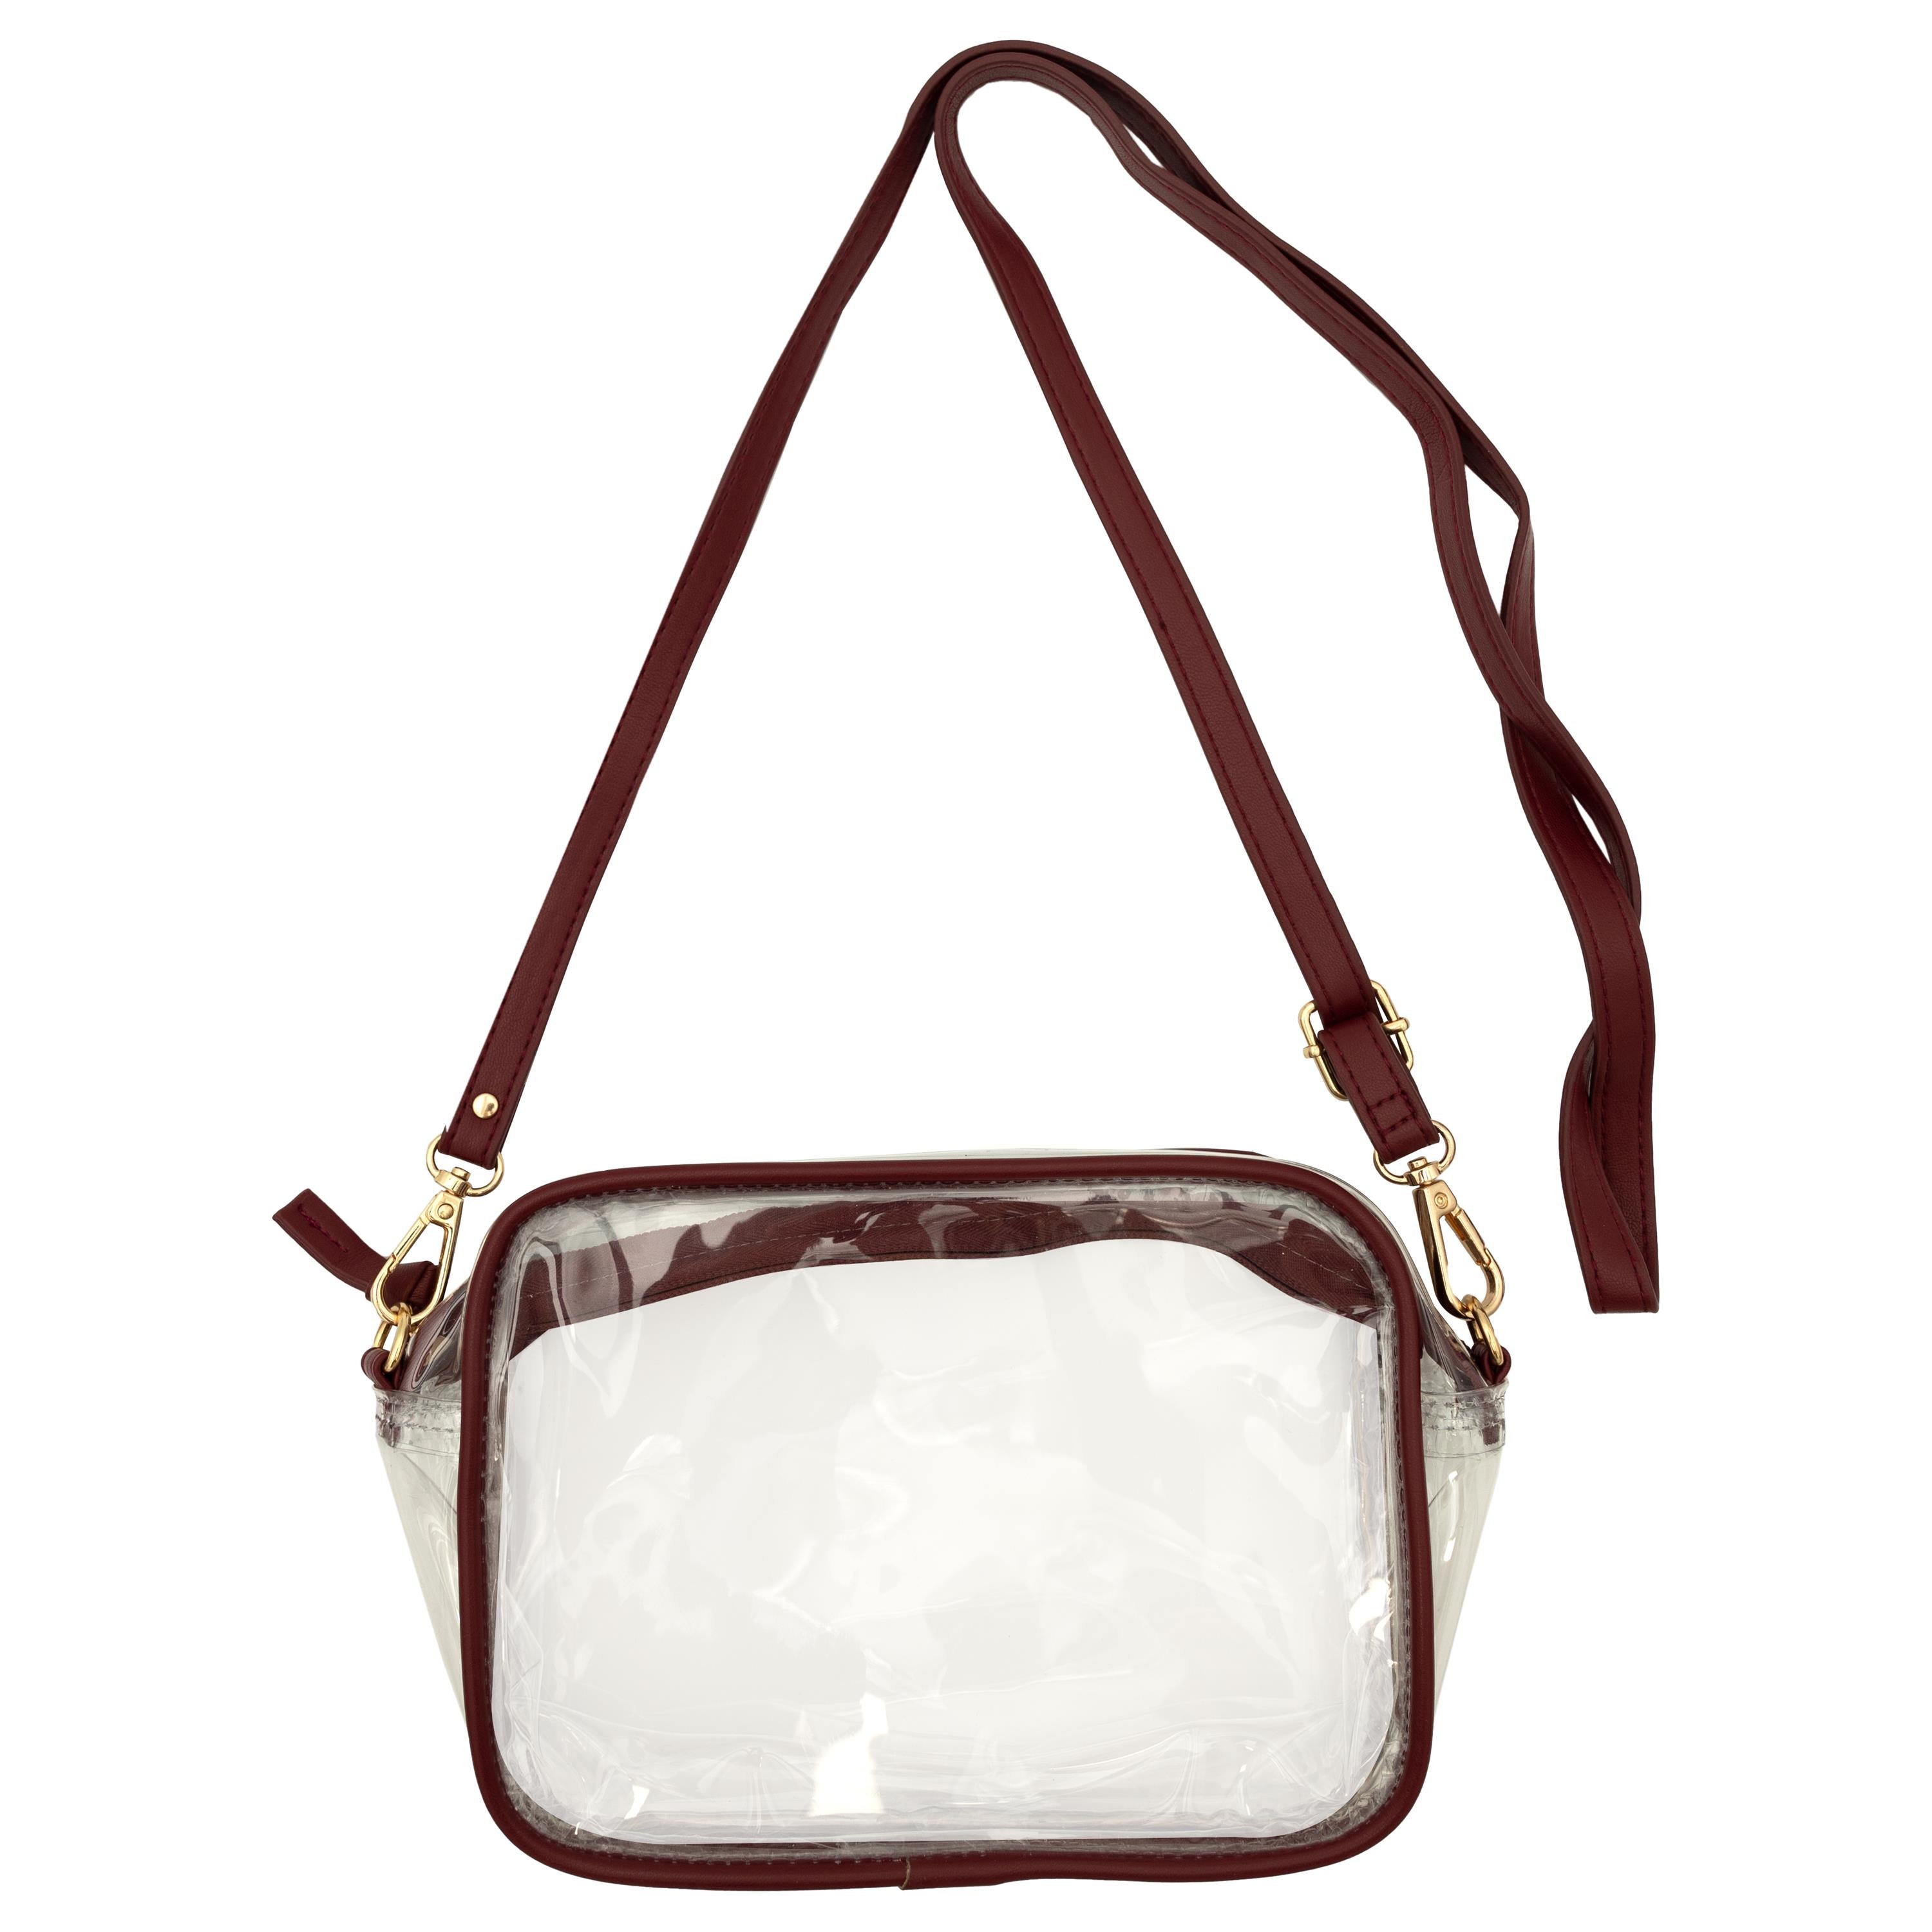 Take Me Out to the Ball Game Clear Crossbody Stadium Bag